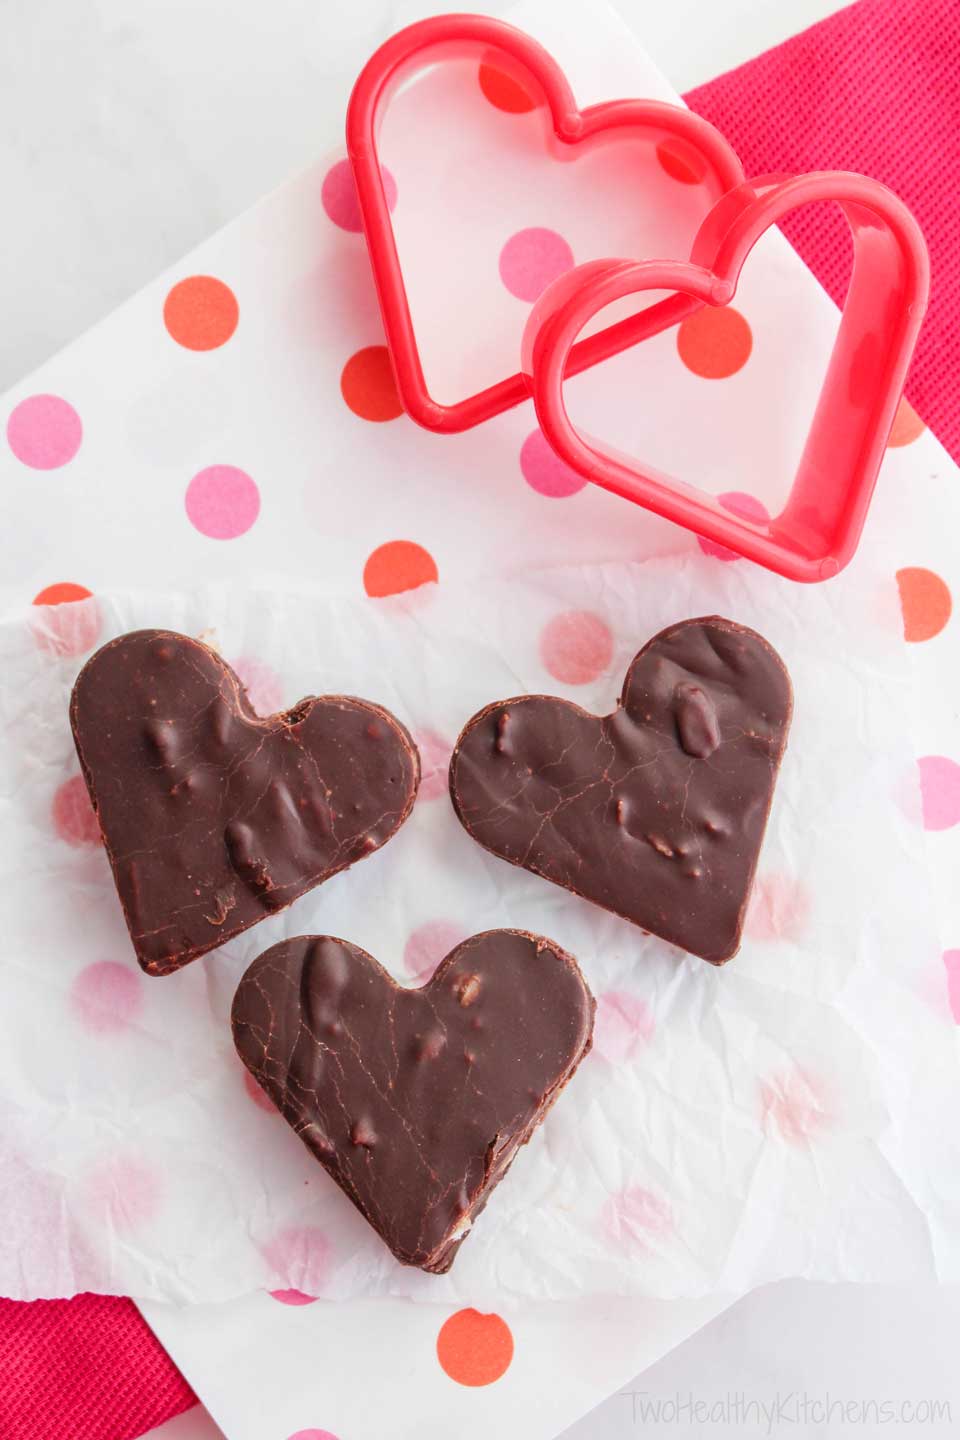 healthier fudge, cut into heart shapes and laying on polka dot paper, with heart-shaped cookie cutters nearby